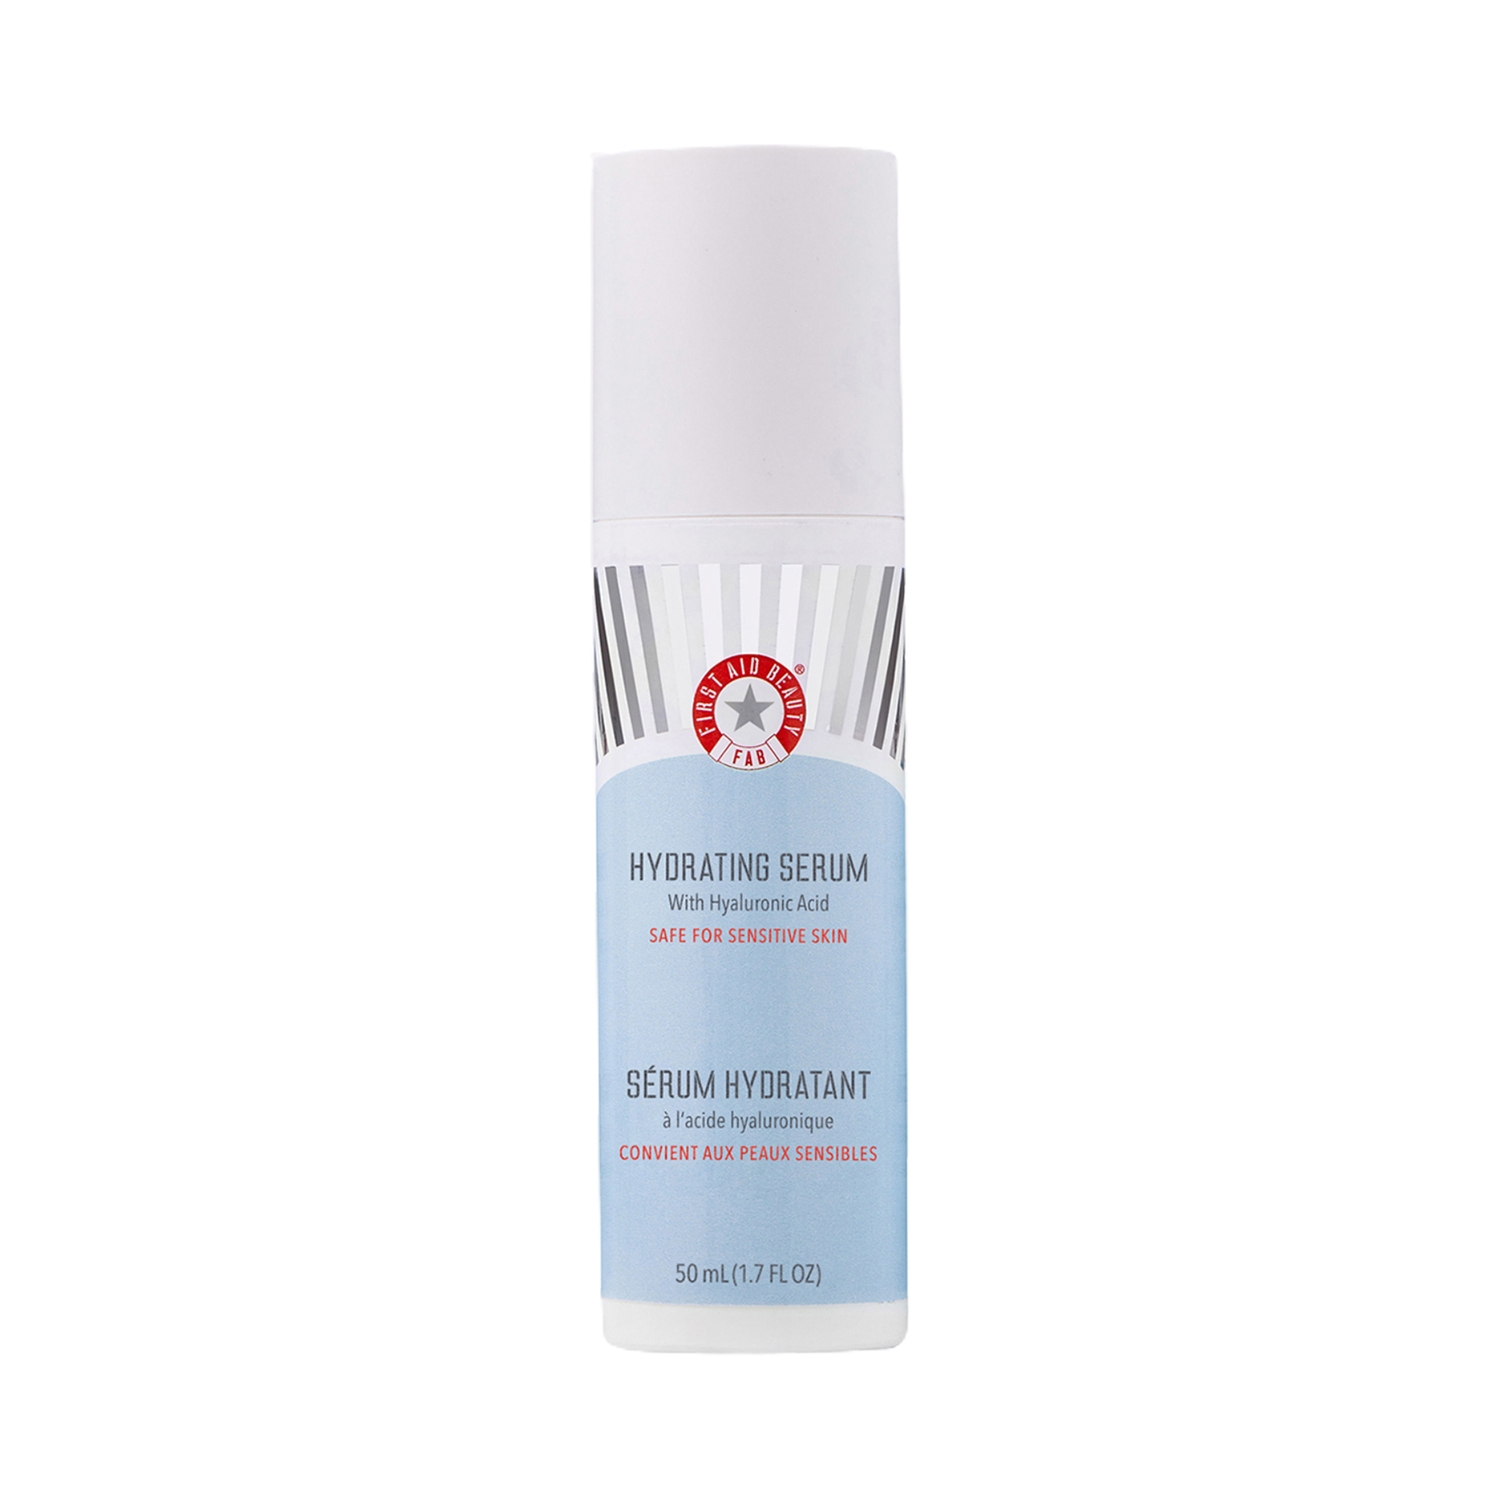 First Aid Beauty | First Aid Beauty Hydrating Serum With Hyaluronic Acid (50ml)